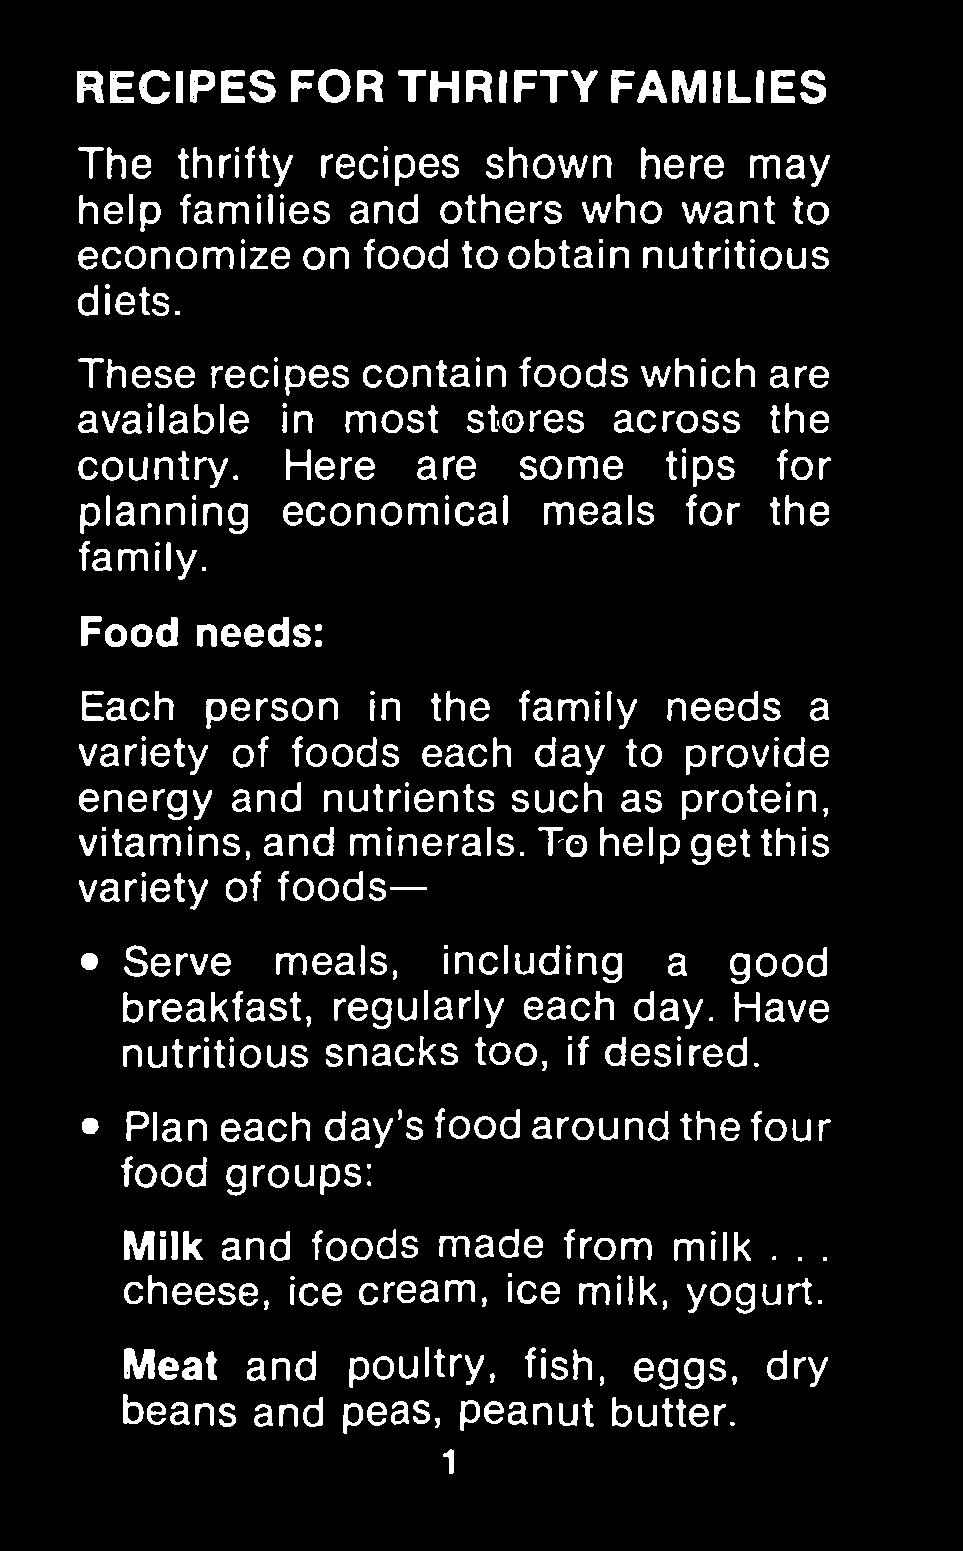 RECIPES FOR THRIFTY FAMILIES The thrifty recipes shown here may help families and others who want to economize on food to obtain nutritious diets.